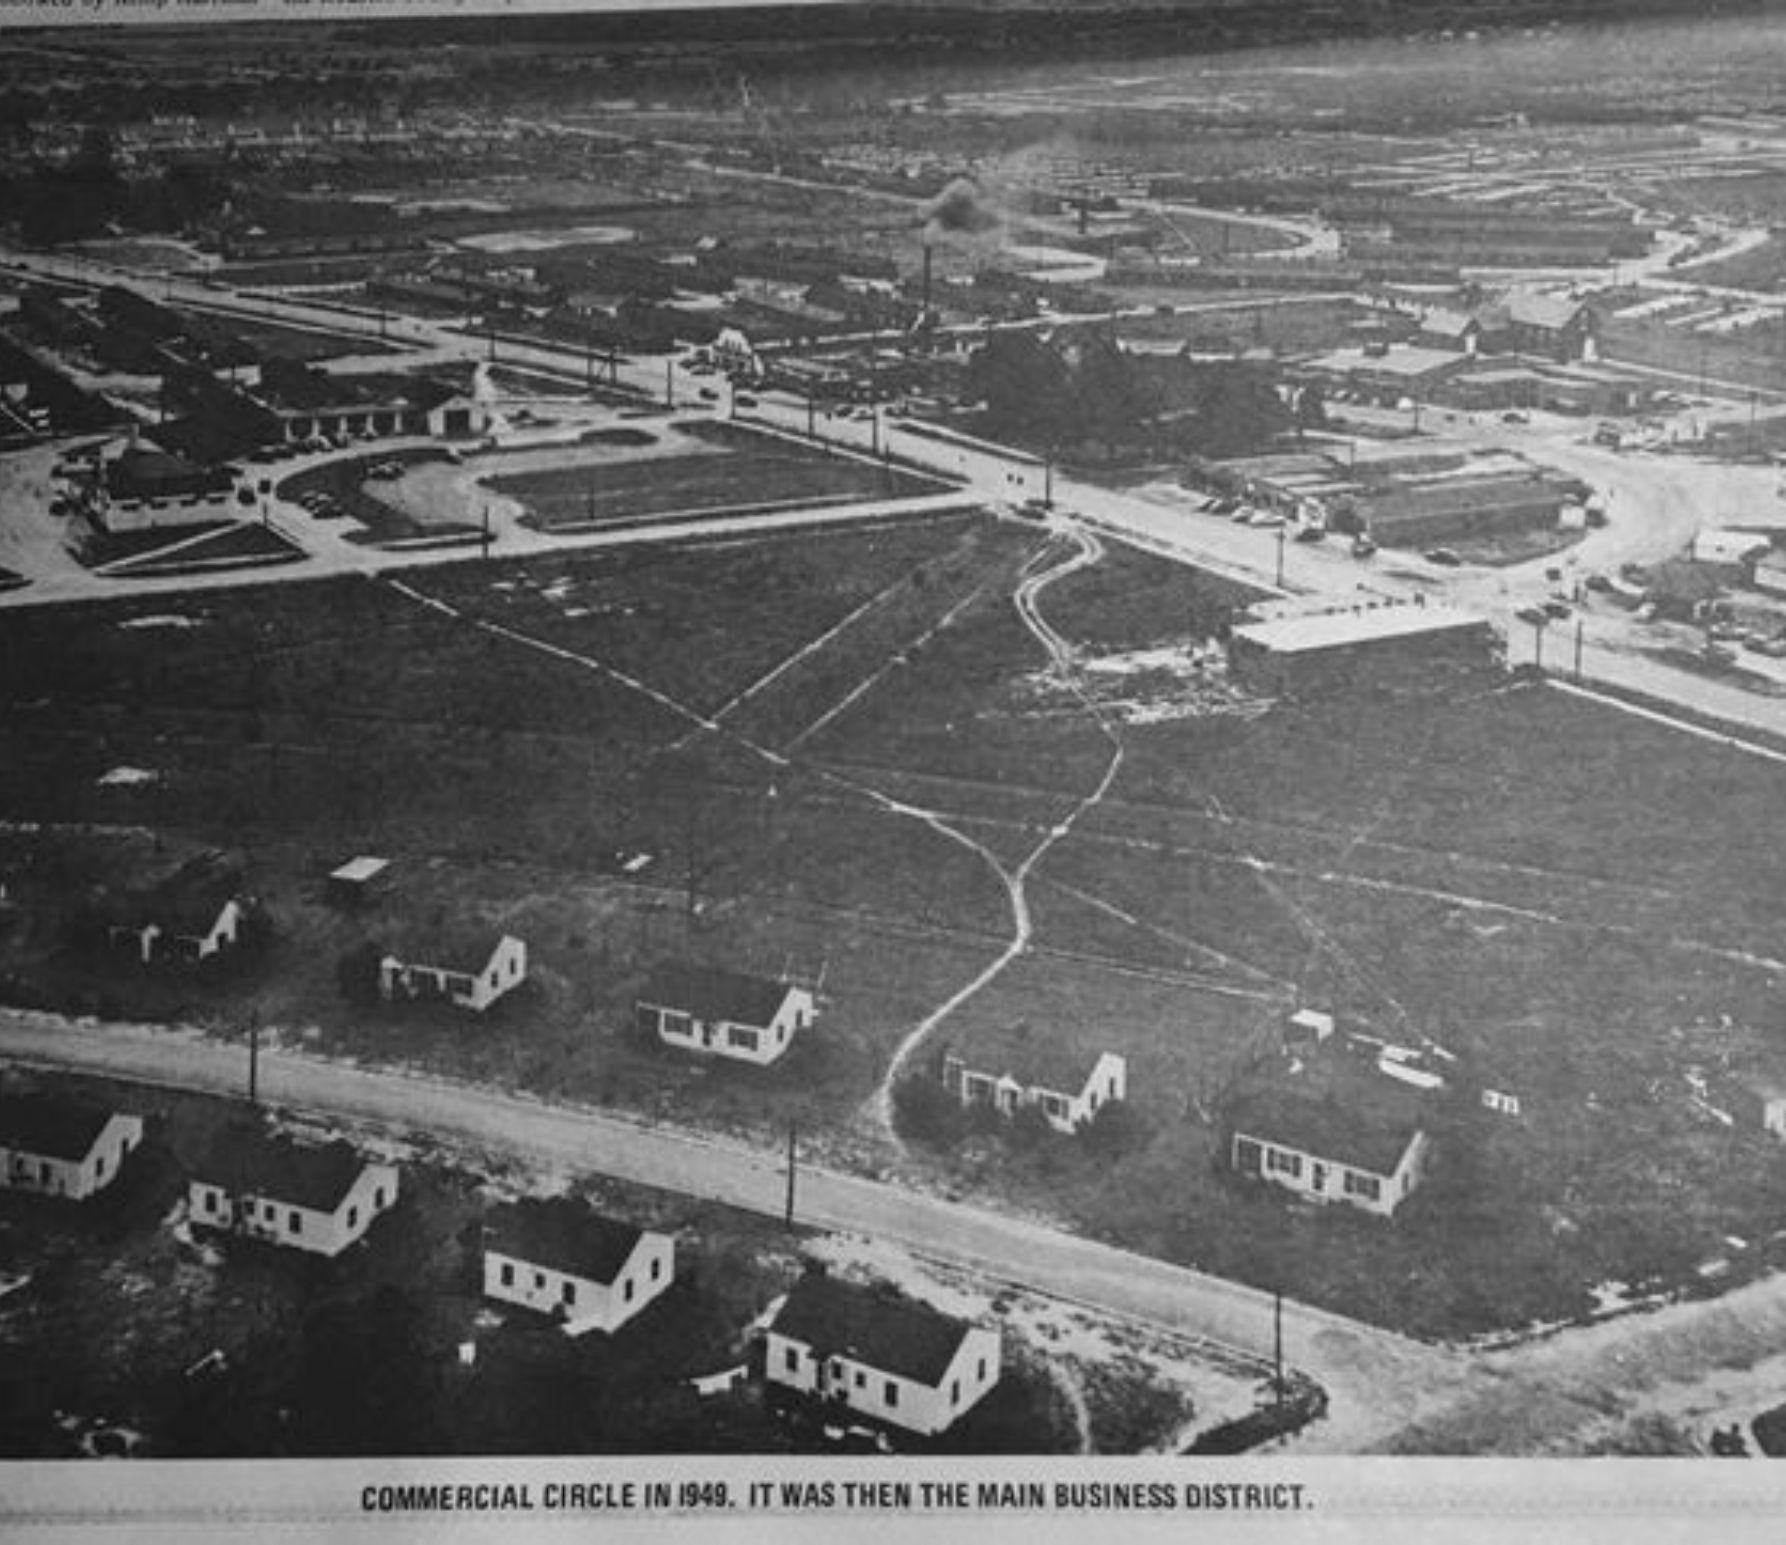 Commercial Circle in 1949